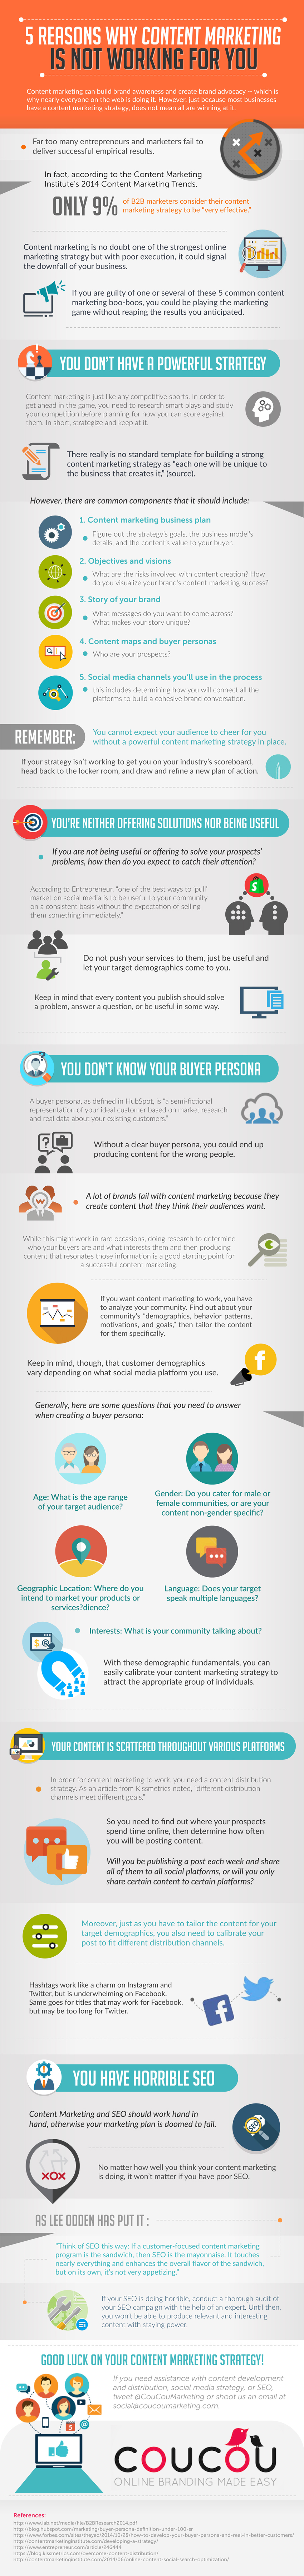 5 Reasons Why Content Marketing is Not Working For You - An Infographic from Coucou Marketing